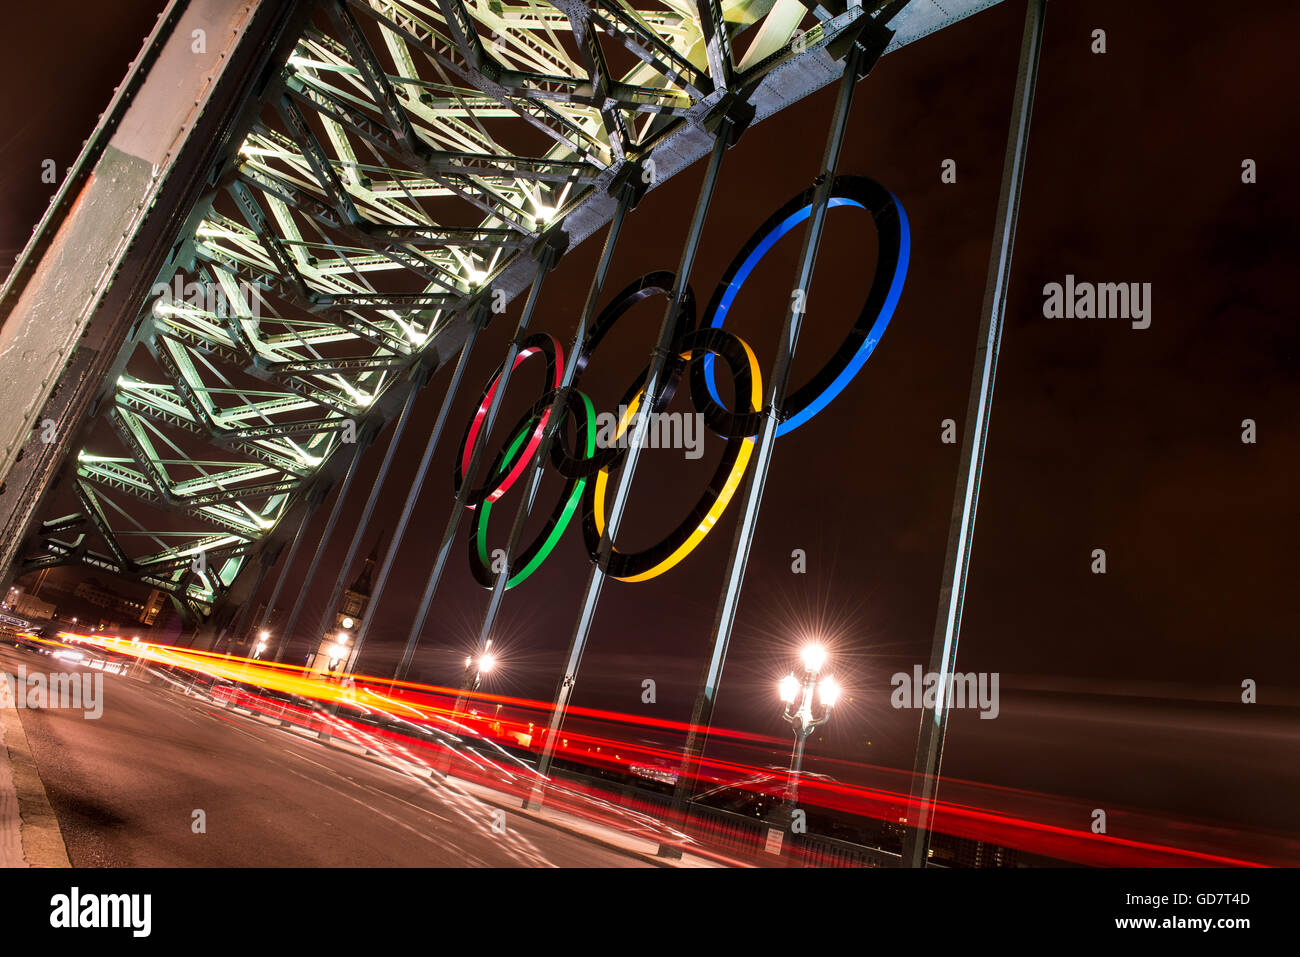 The Olympic Rings hang on the Tyne Bridge in Newcastle during the London Olympics 2012. They are lite up at night as traffic passes by. Stock Photo